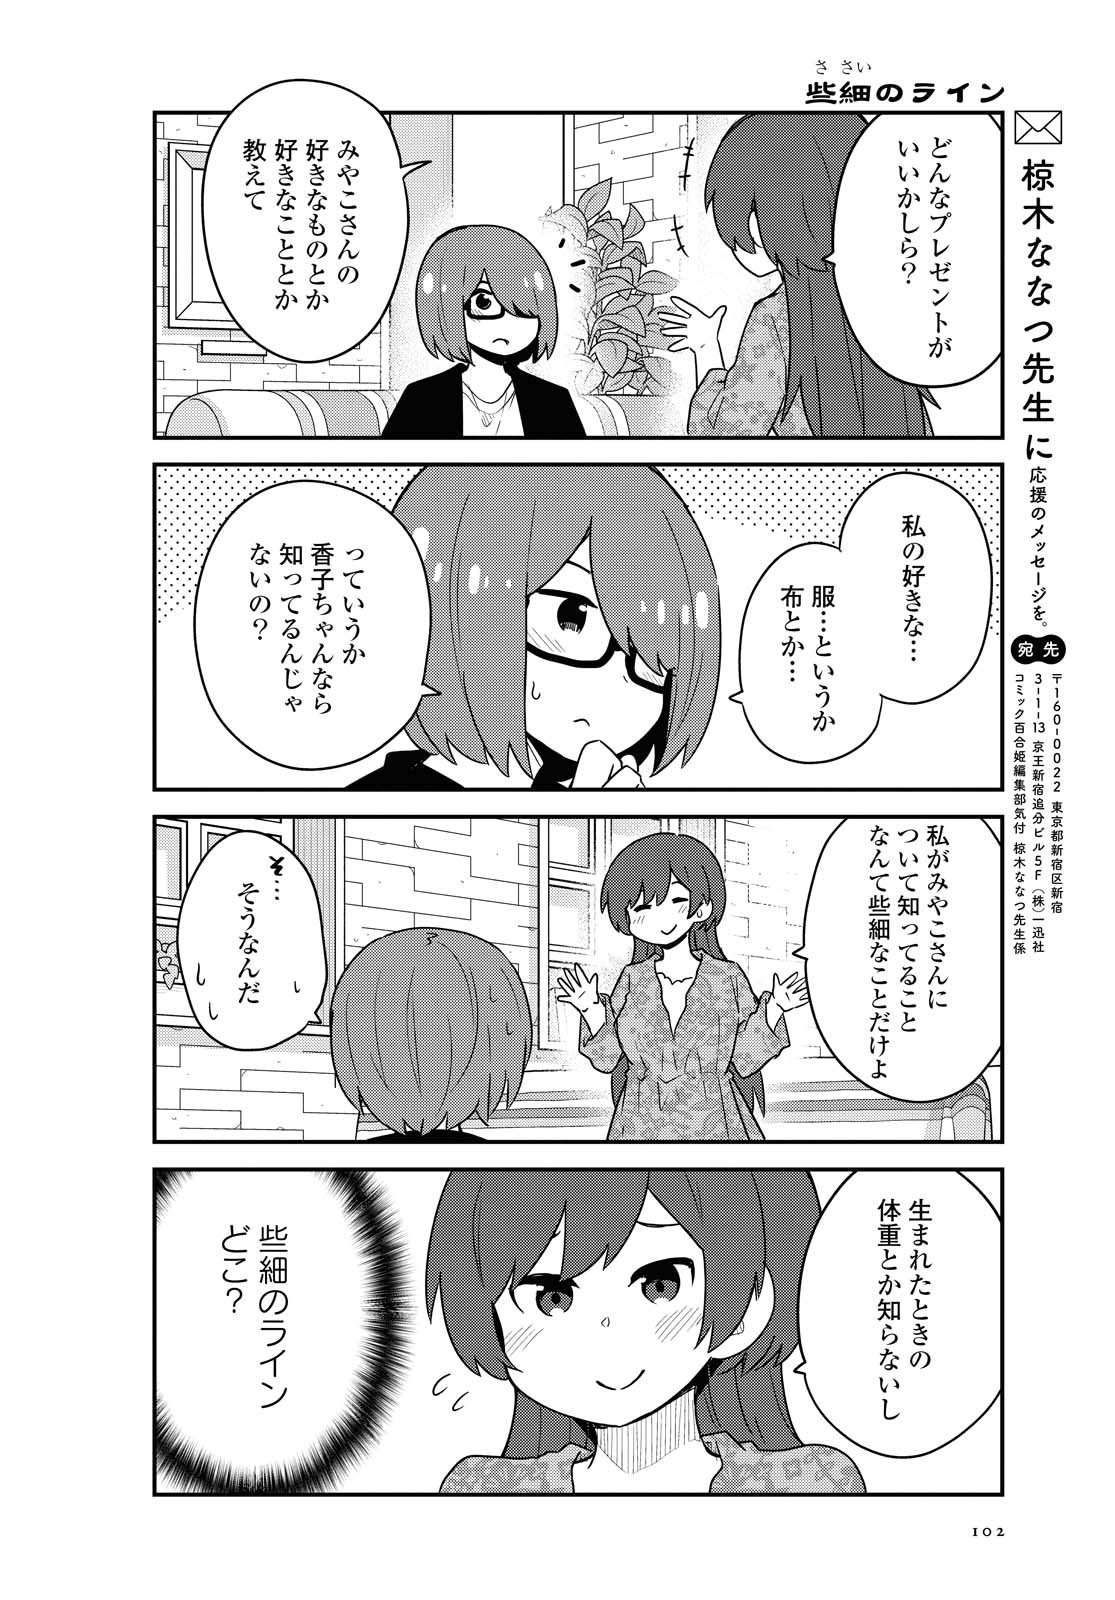 Wataten! An Angel Flew Down to Me 私に天使が舞い降りた！ 第82話 - Page 14